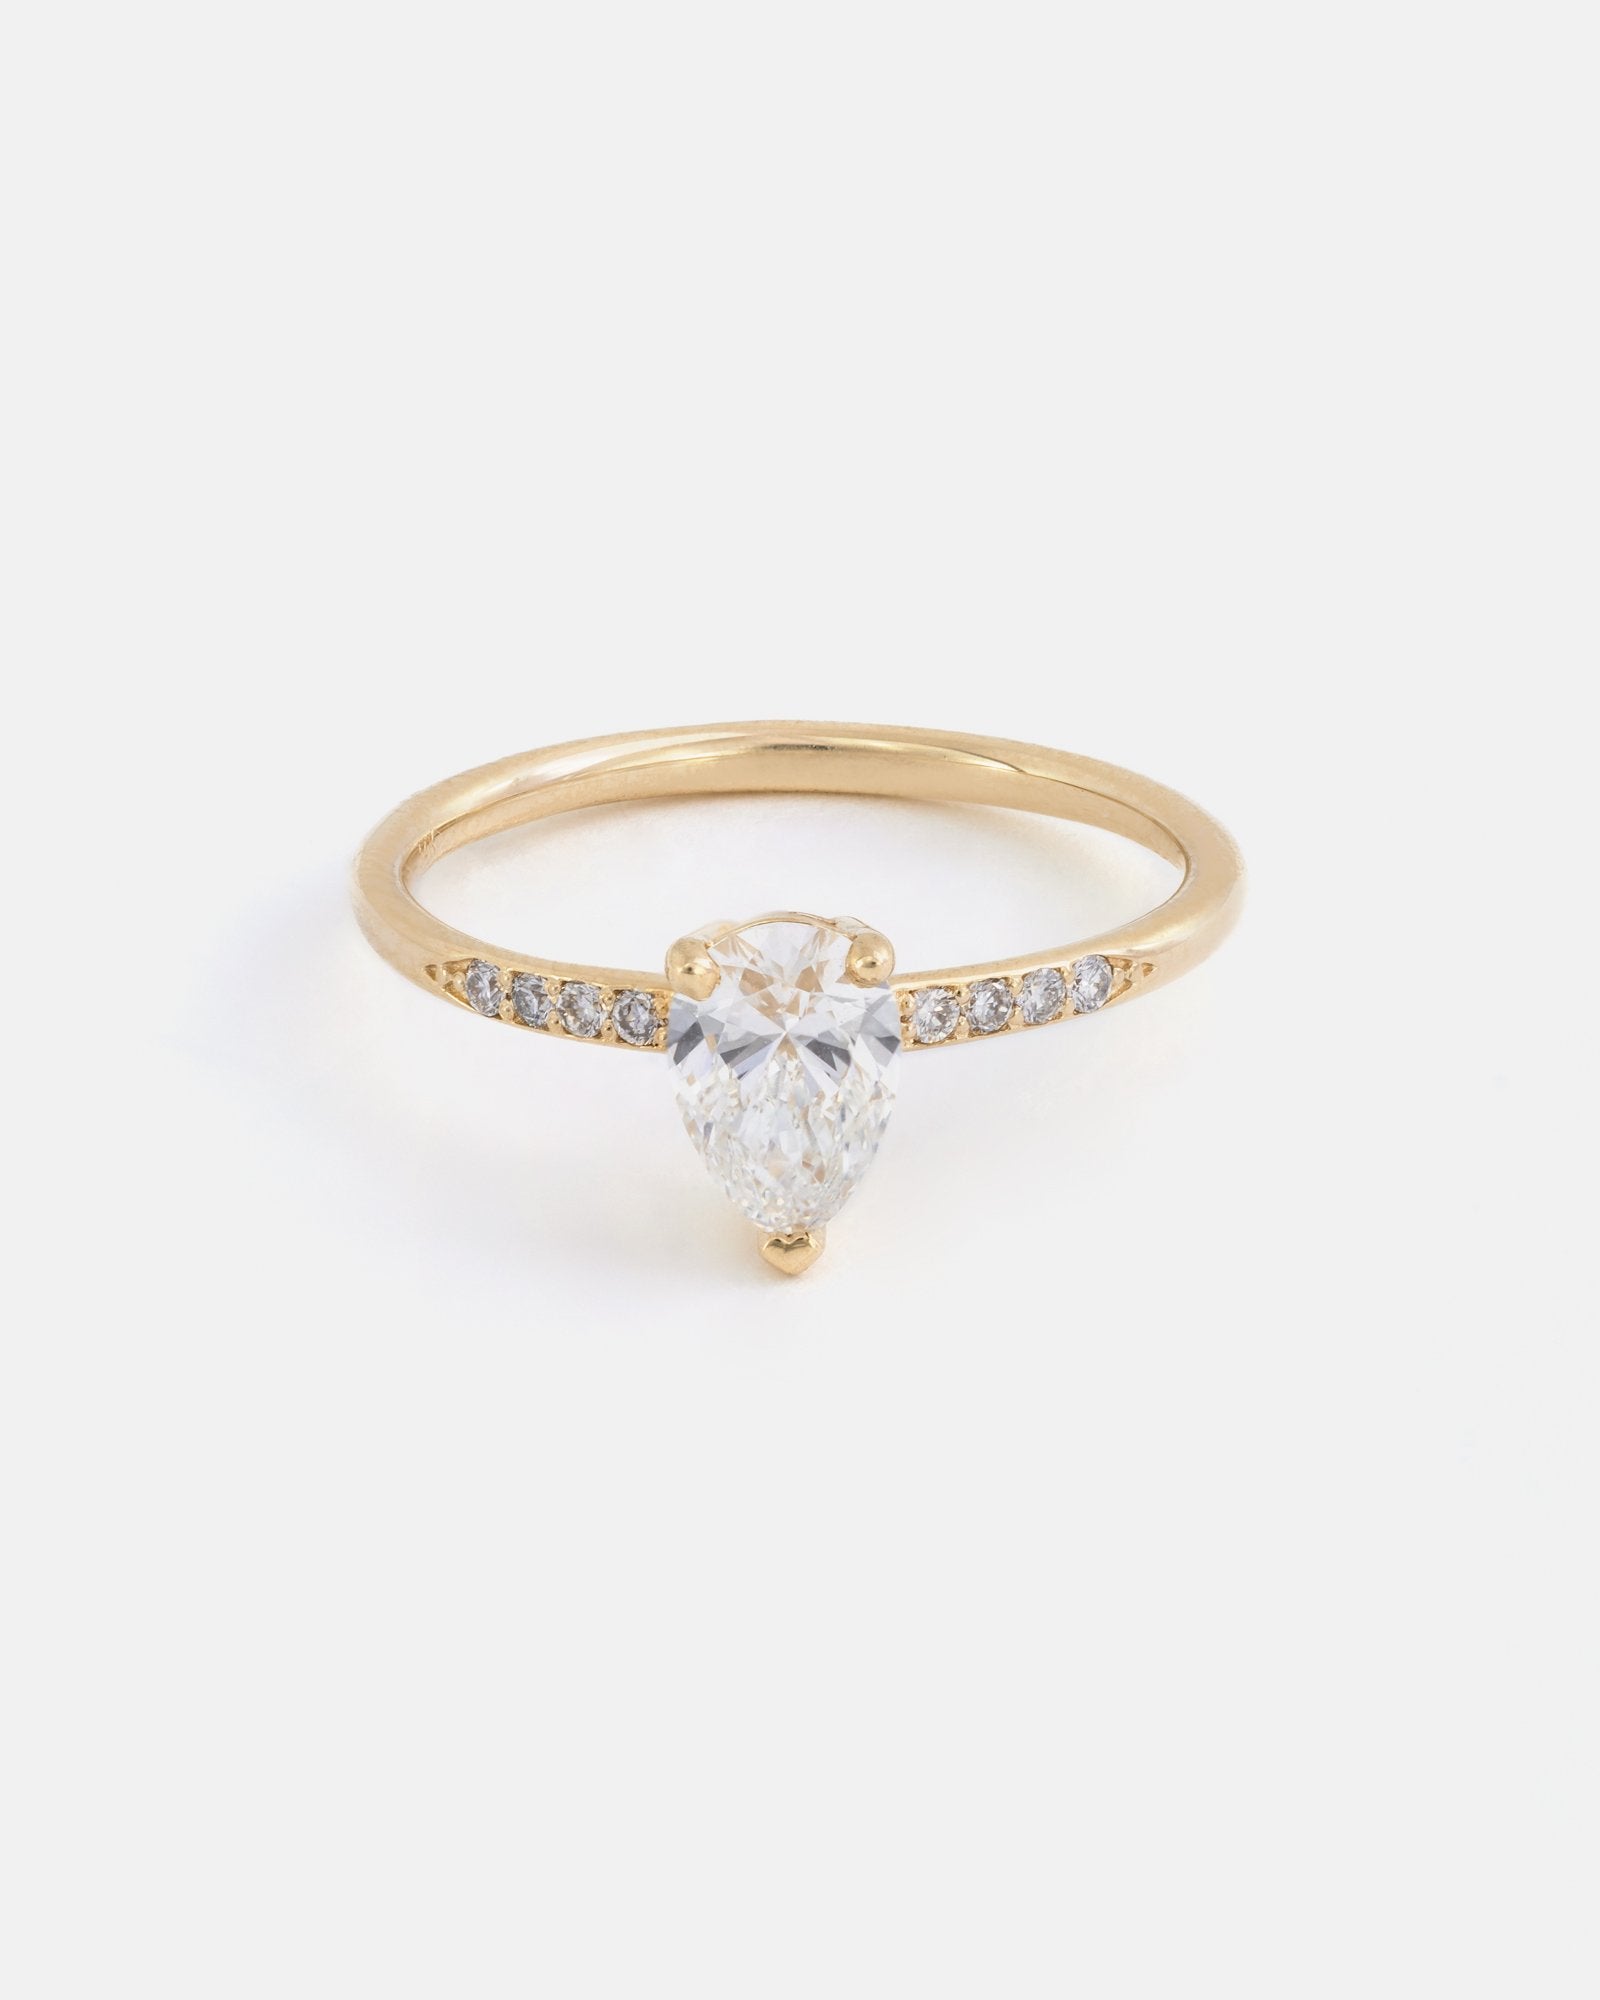 Pira Ring in Fairmined Gold with Lab Grown Diamonds